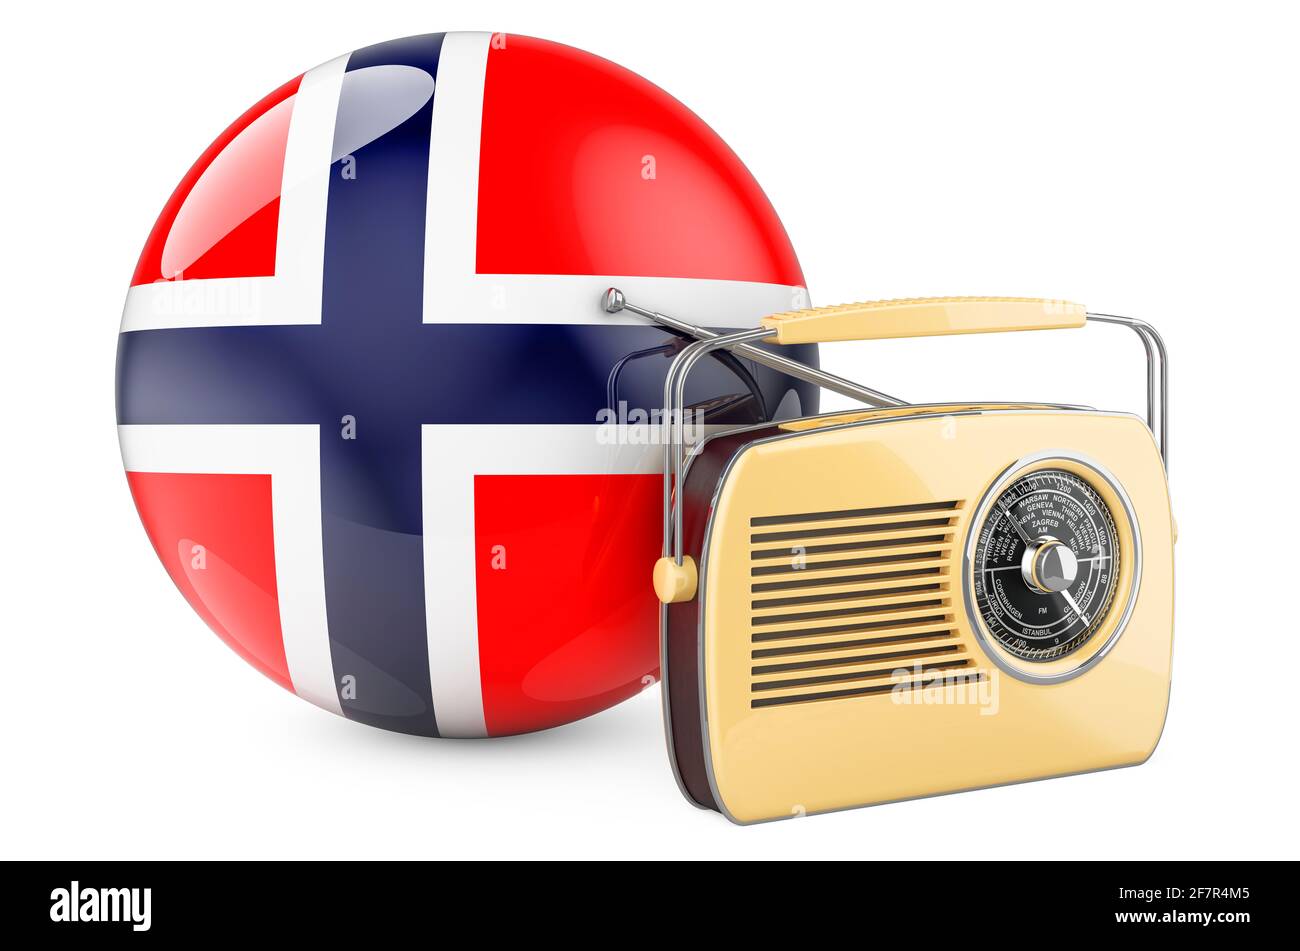 Radio broadcasting in Norway concept. Radio receiver with Norwegian flag. 3D rendering isolated on white background Stock Photo